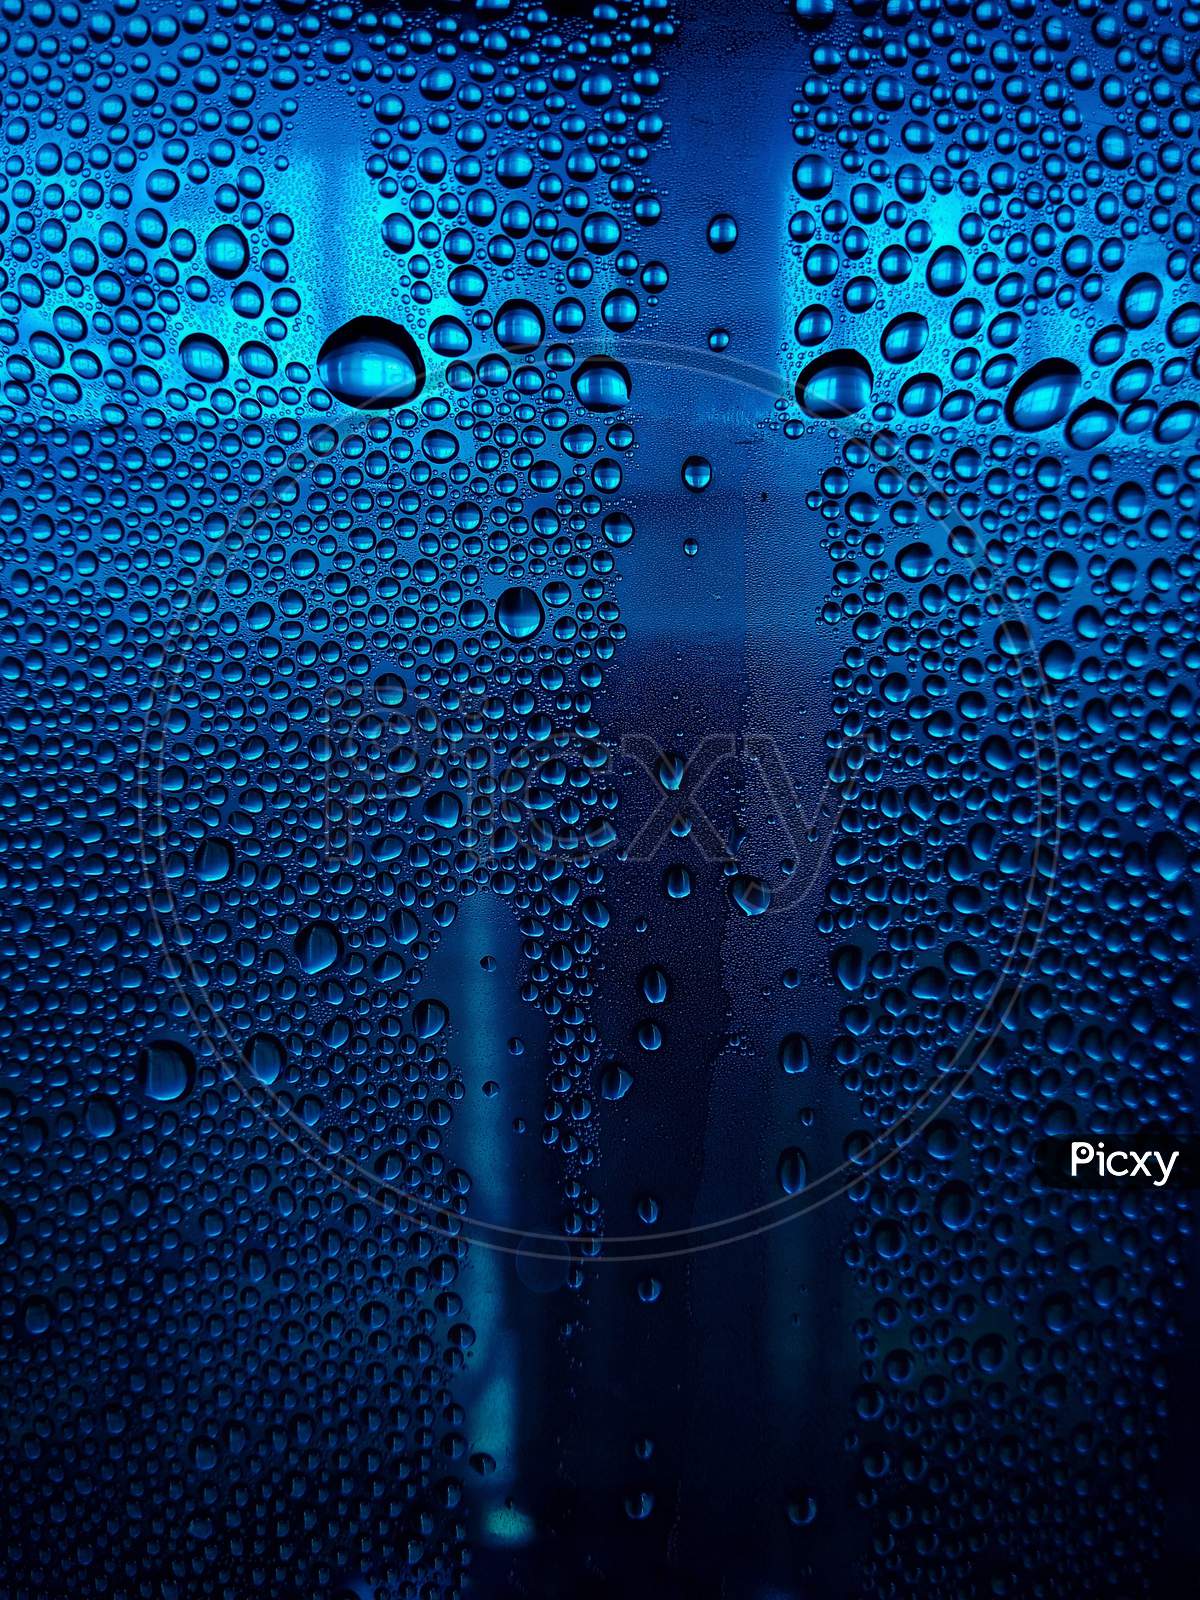 Water Drops Sparkle.